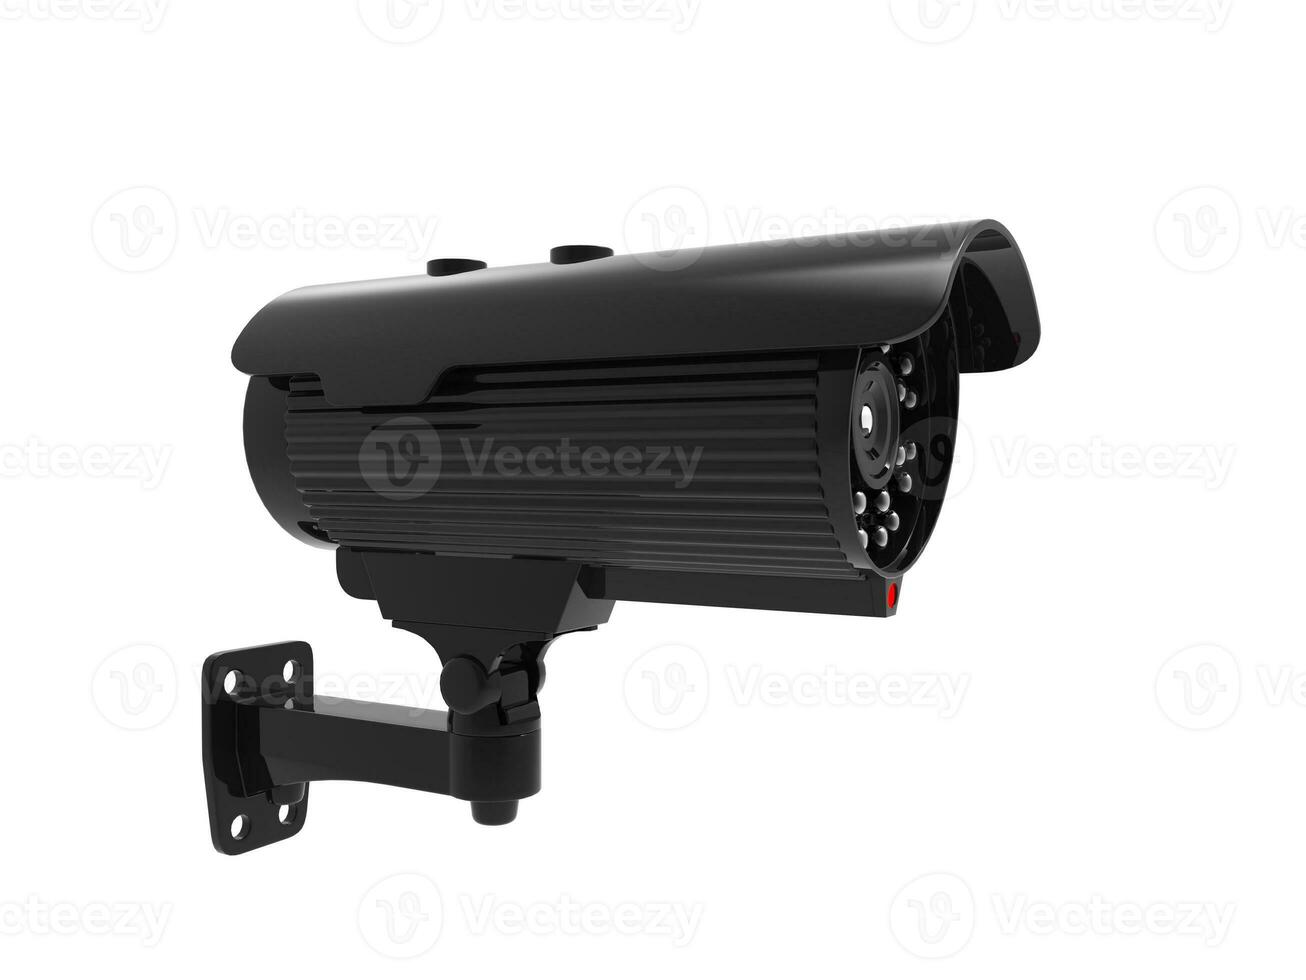 Wall mounted security surveillance camera - side view photo